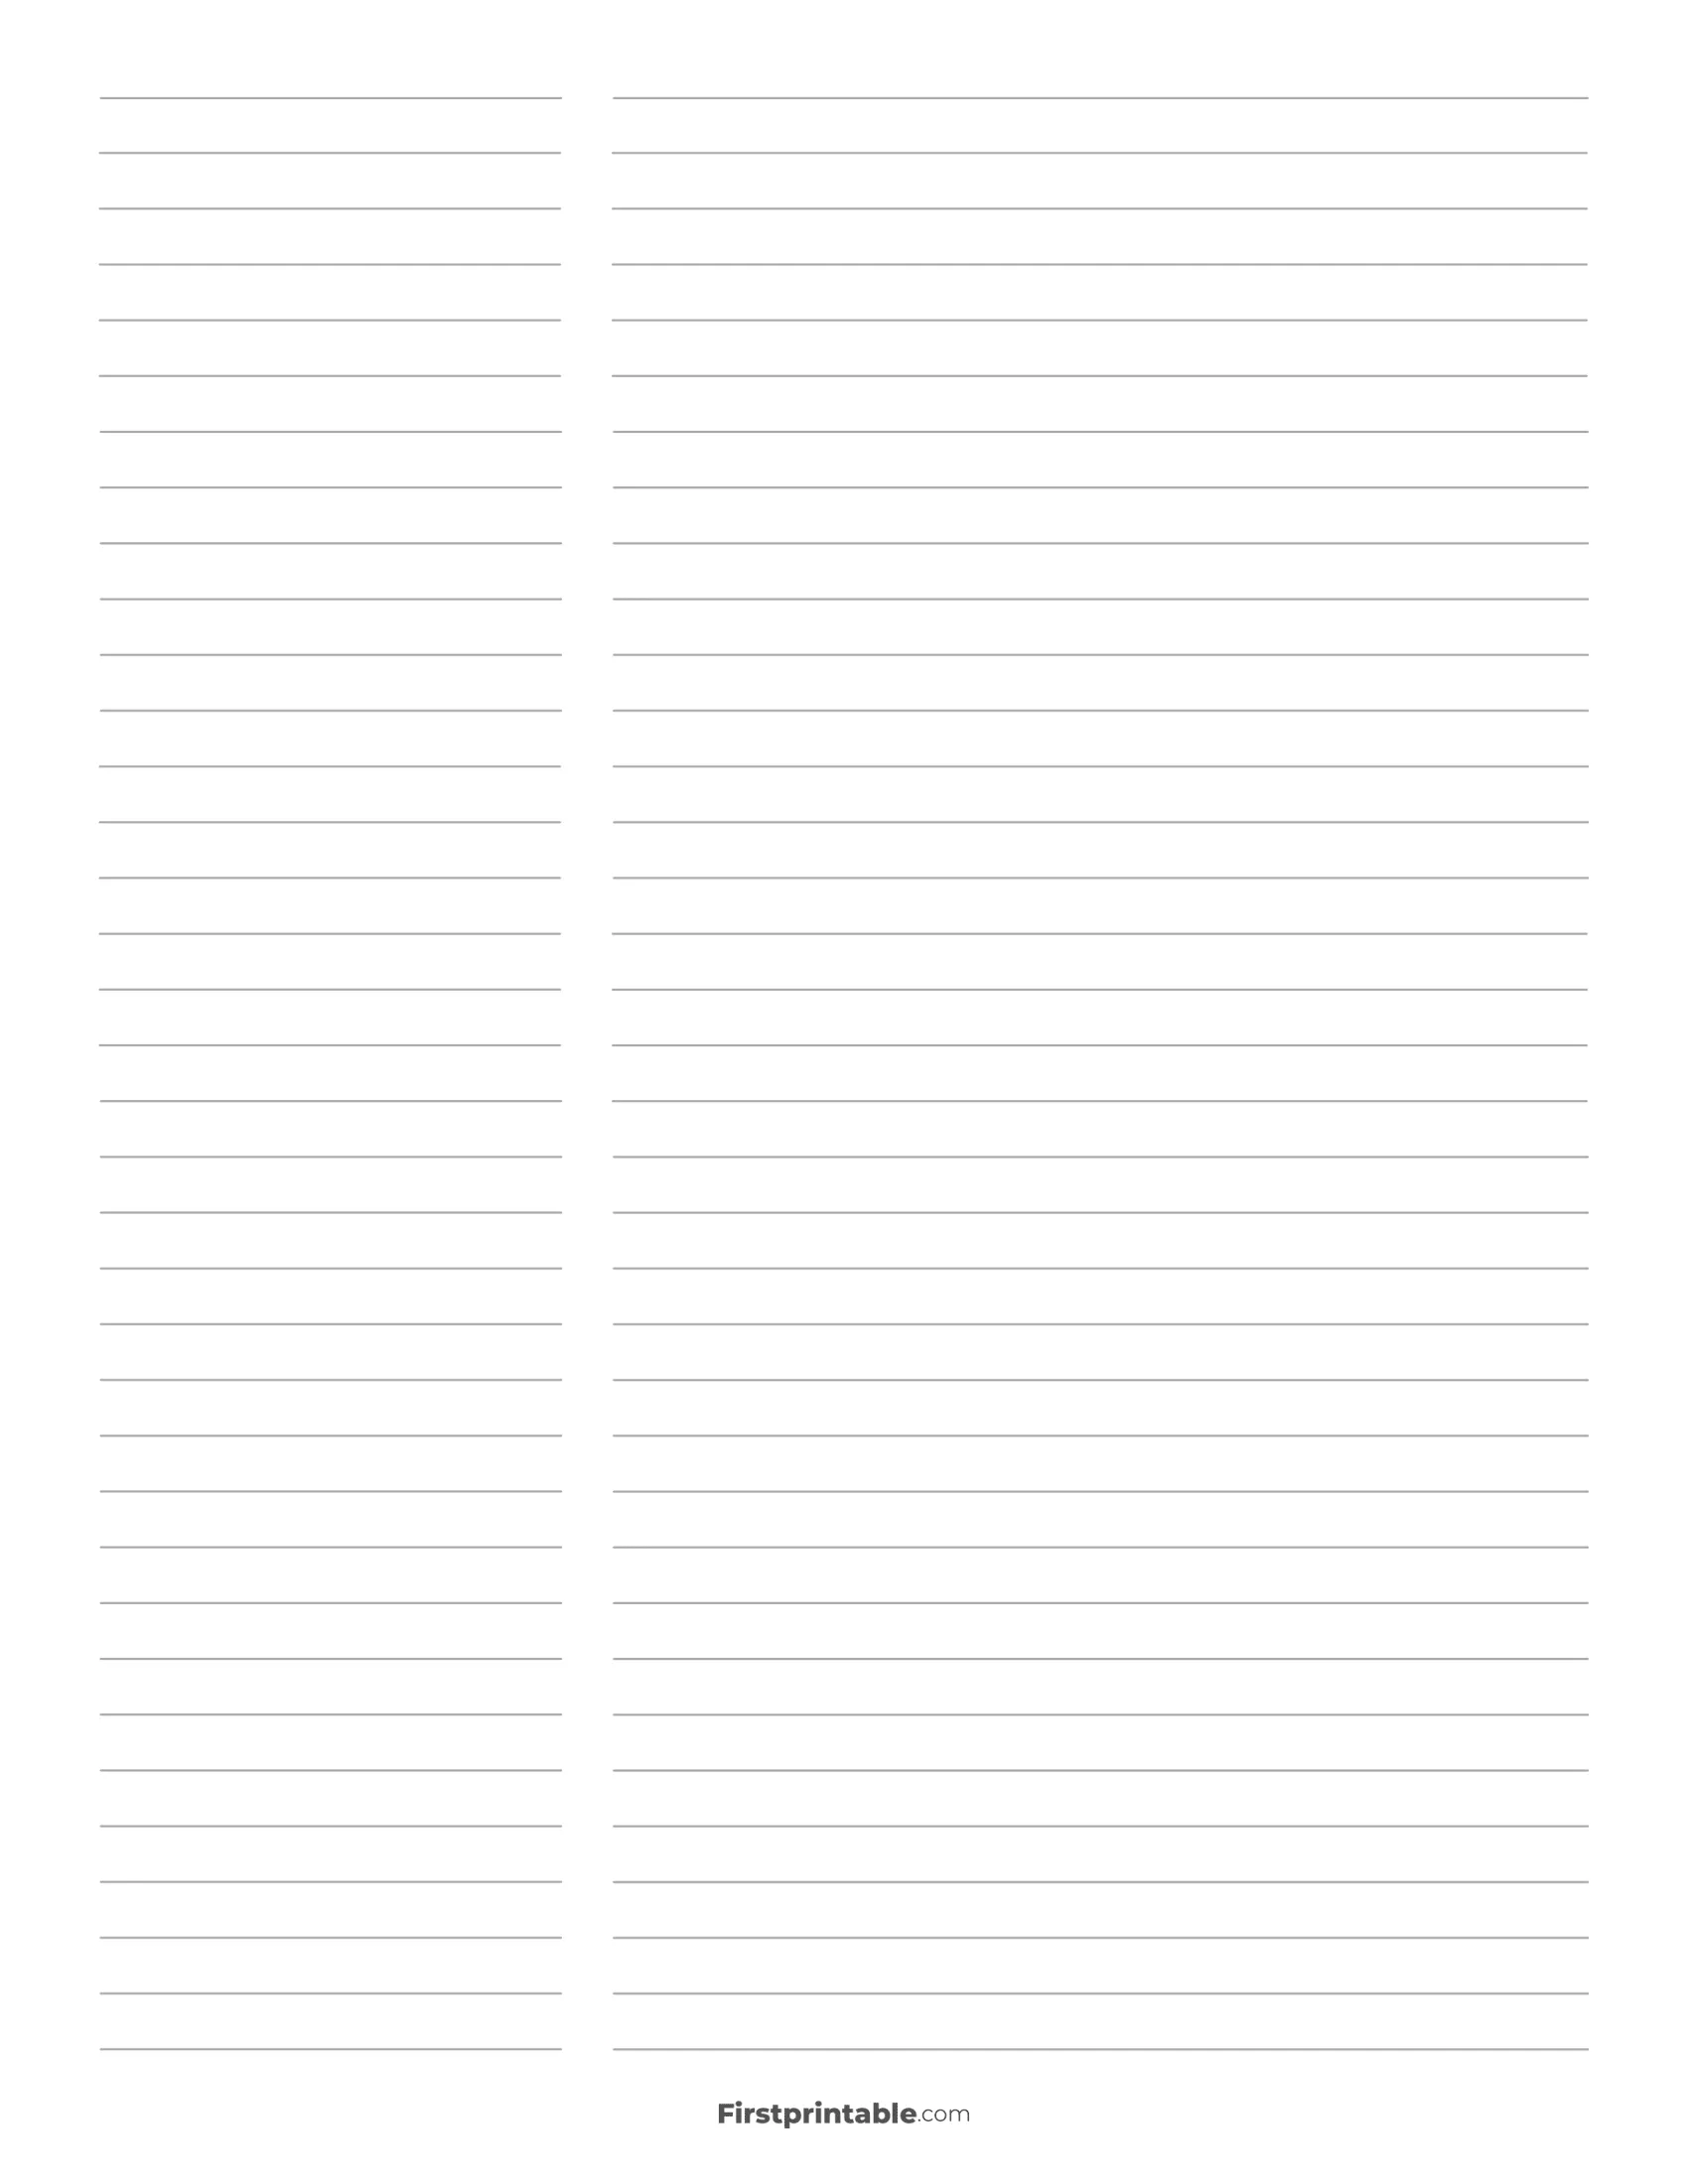 Printable Lined Paper - 2 Column Right